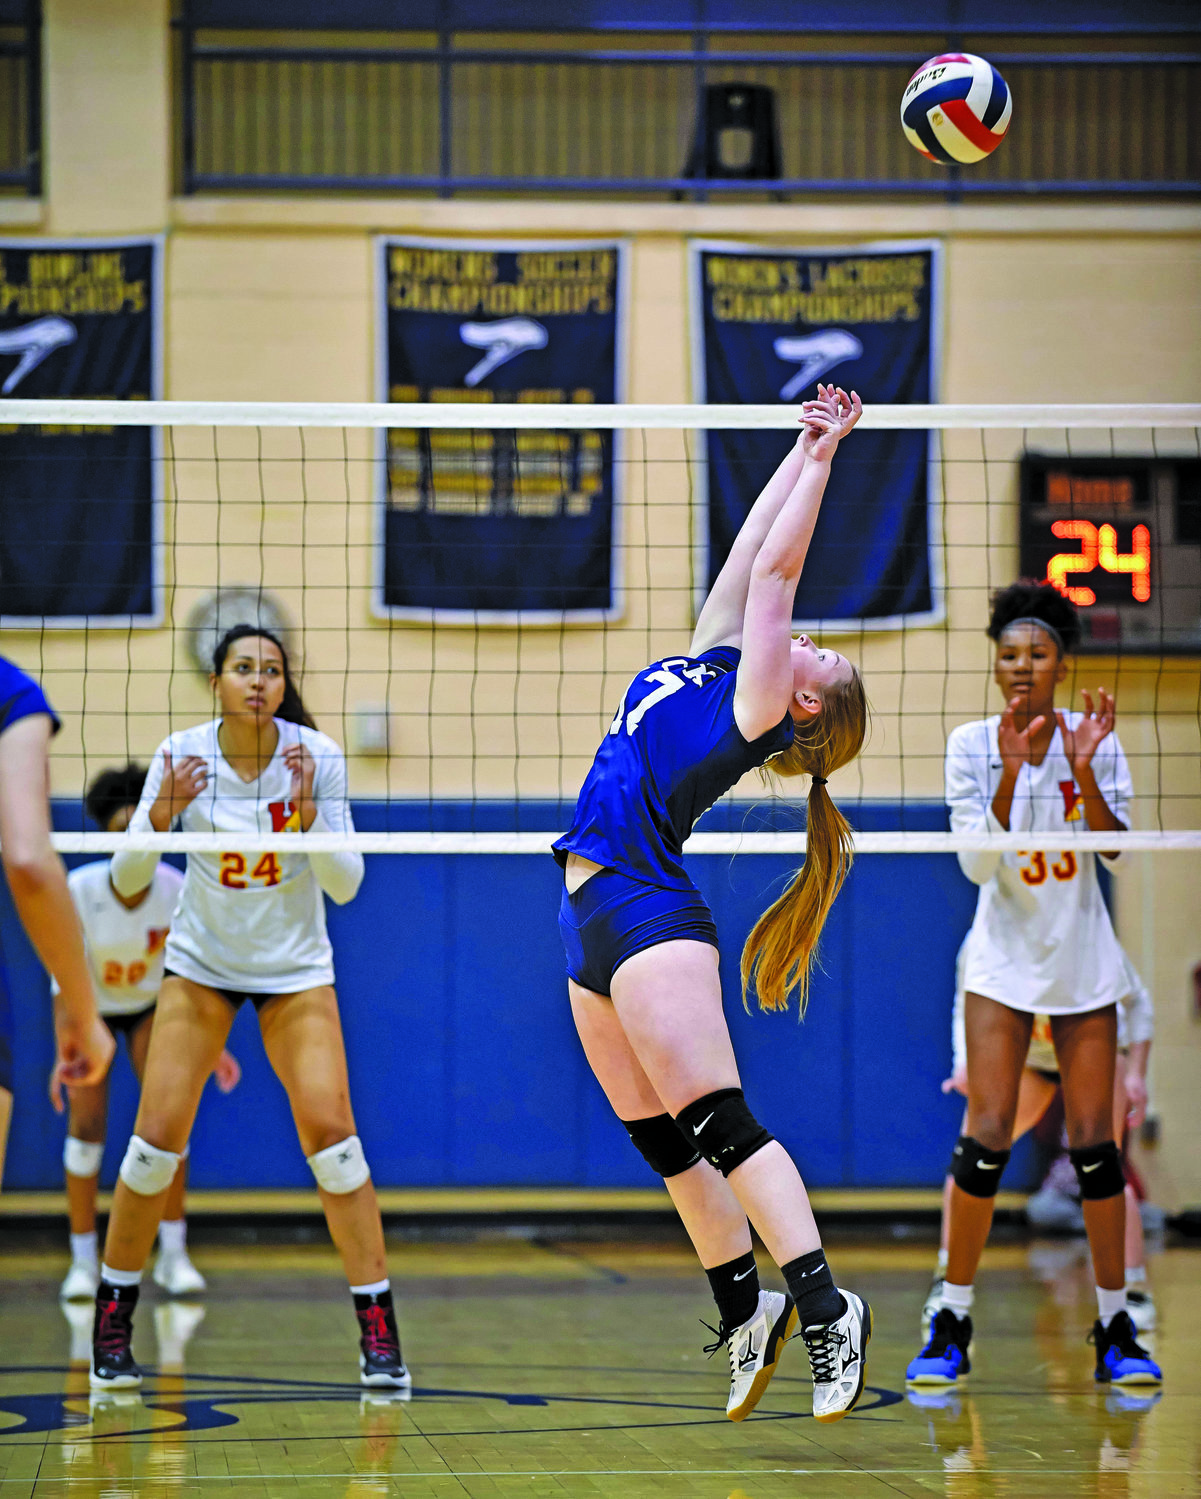 CR South’s Lili Lauch stretches to set up a spike.